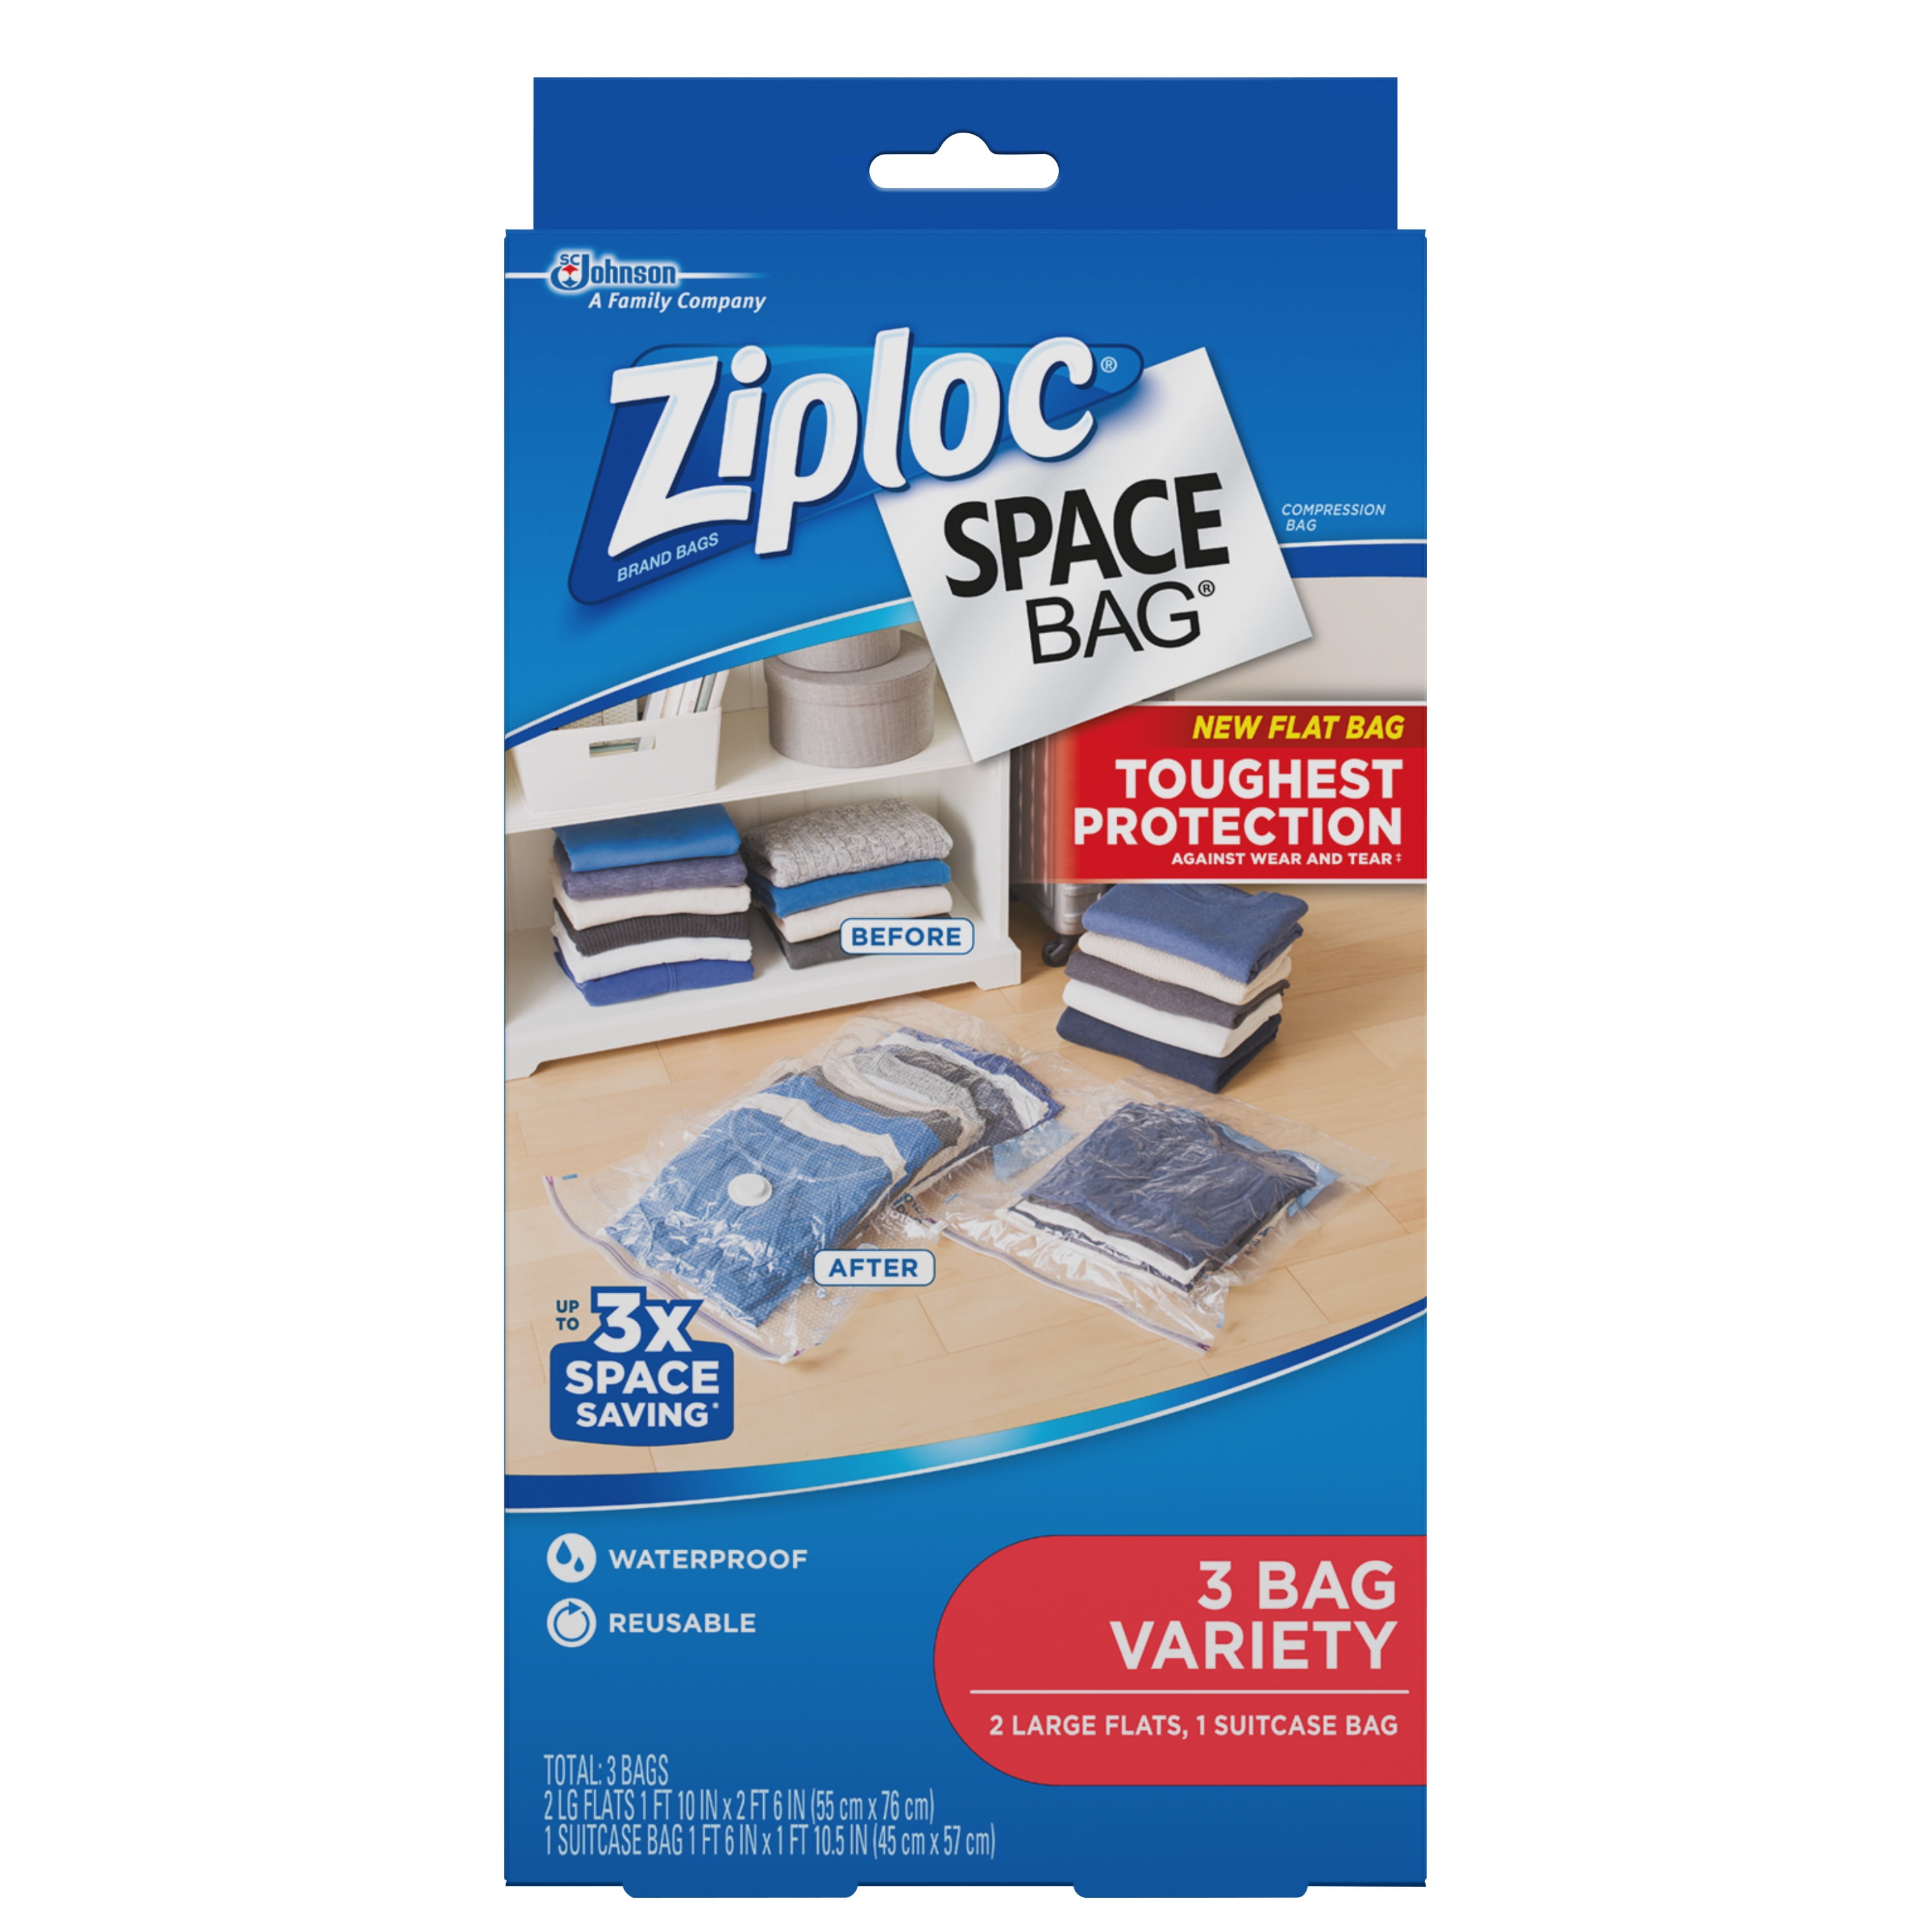 ziploc space bags for travel